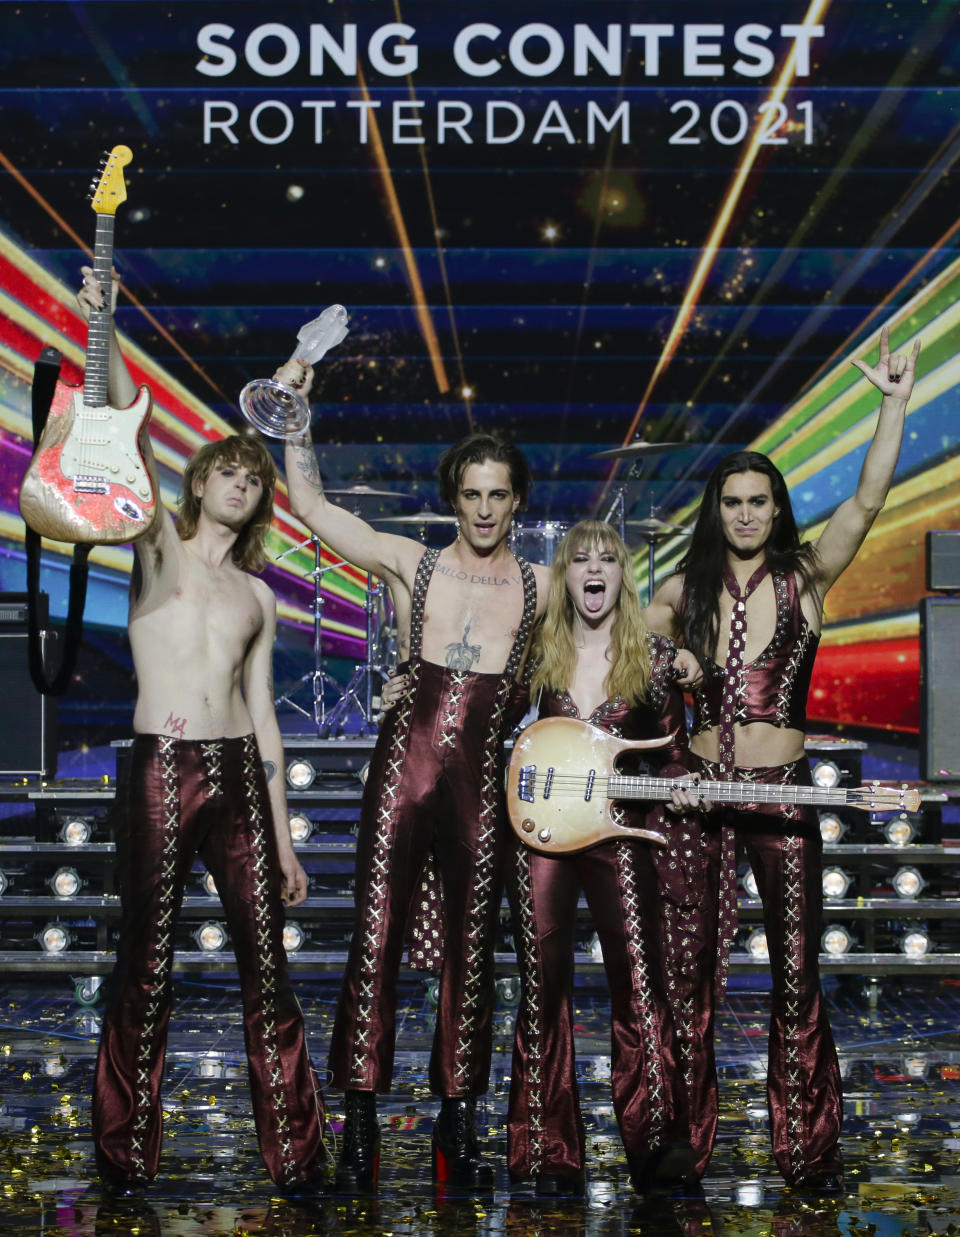 Members of the band Maneskin from Italy guitarist Thomas Raggi, from left, lead vocalist Damiano David, bass player Victoria De Angelis and drummer Ethan Torchio, pose for photographers with the trophy after winning the Grand Final of the Eurovision Song Contest at Ahoy arena in Rotterdam, early Sunday, May 23, 2021. (AP Photo/Peter Dejong)